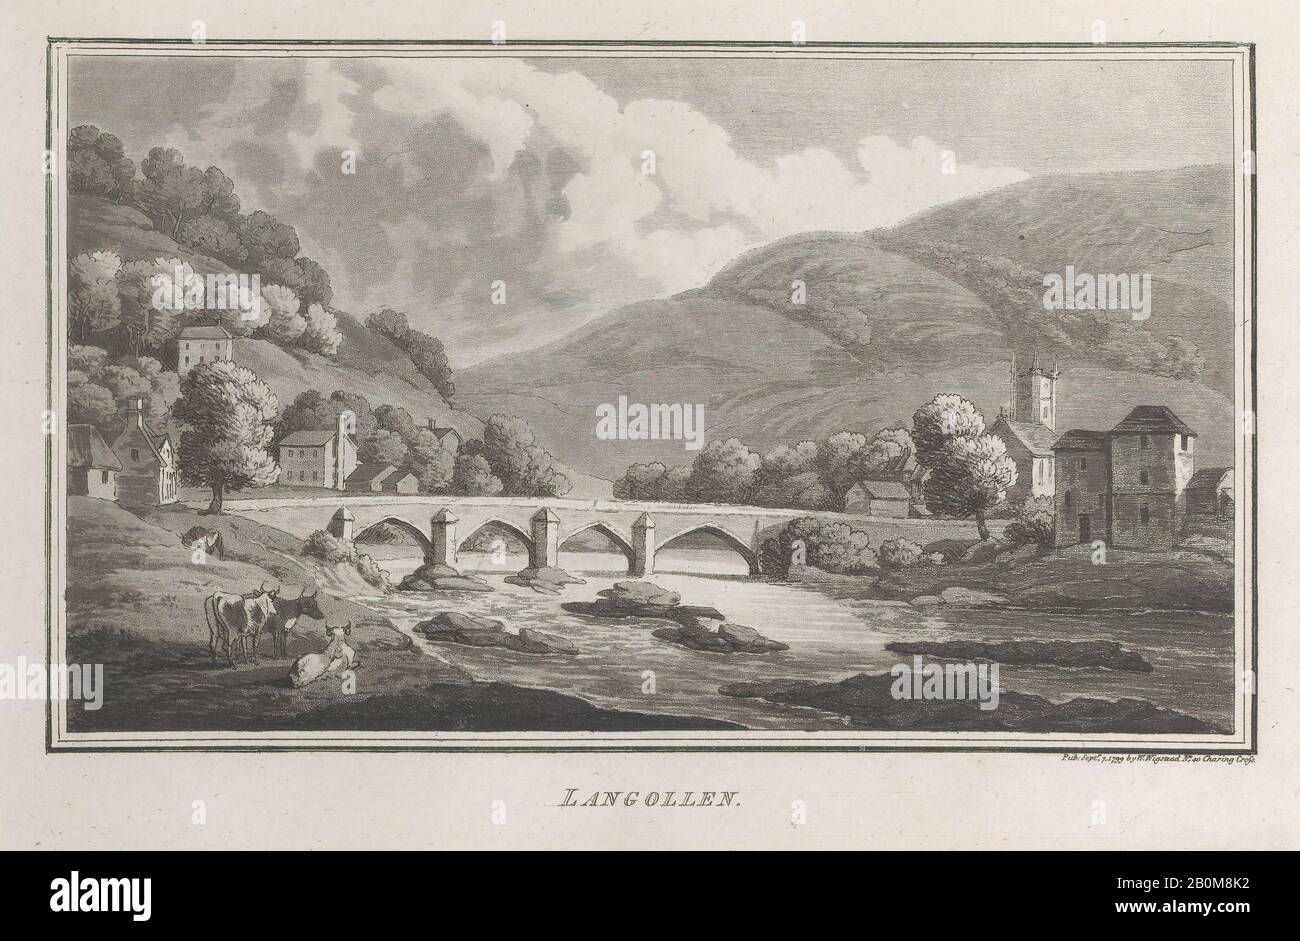 John Hill, Langollen, from 'Remarks on a Tour to North and South Wales, in the year 1797', 'Remarks on a Tour to North and South Wales, in the year 1797, John Hill (British, ca. 1714–1775), After Thomas Rowlandson (British, London 1757–1827 London), Henry Wigstead (British, 1745?–1800 Margate), September 1, 1799, Etching and aquatint, Sheet: 5 5/16 × 8 1/16 in. (13.5 × 20.5 cm), Prints Stock Photo